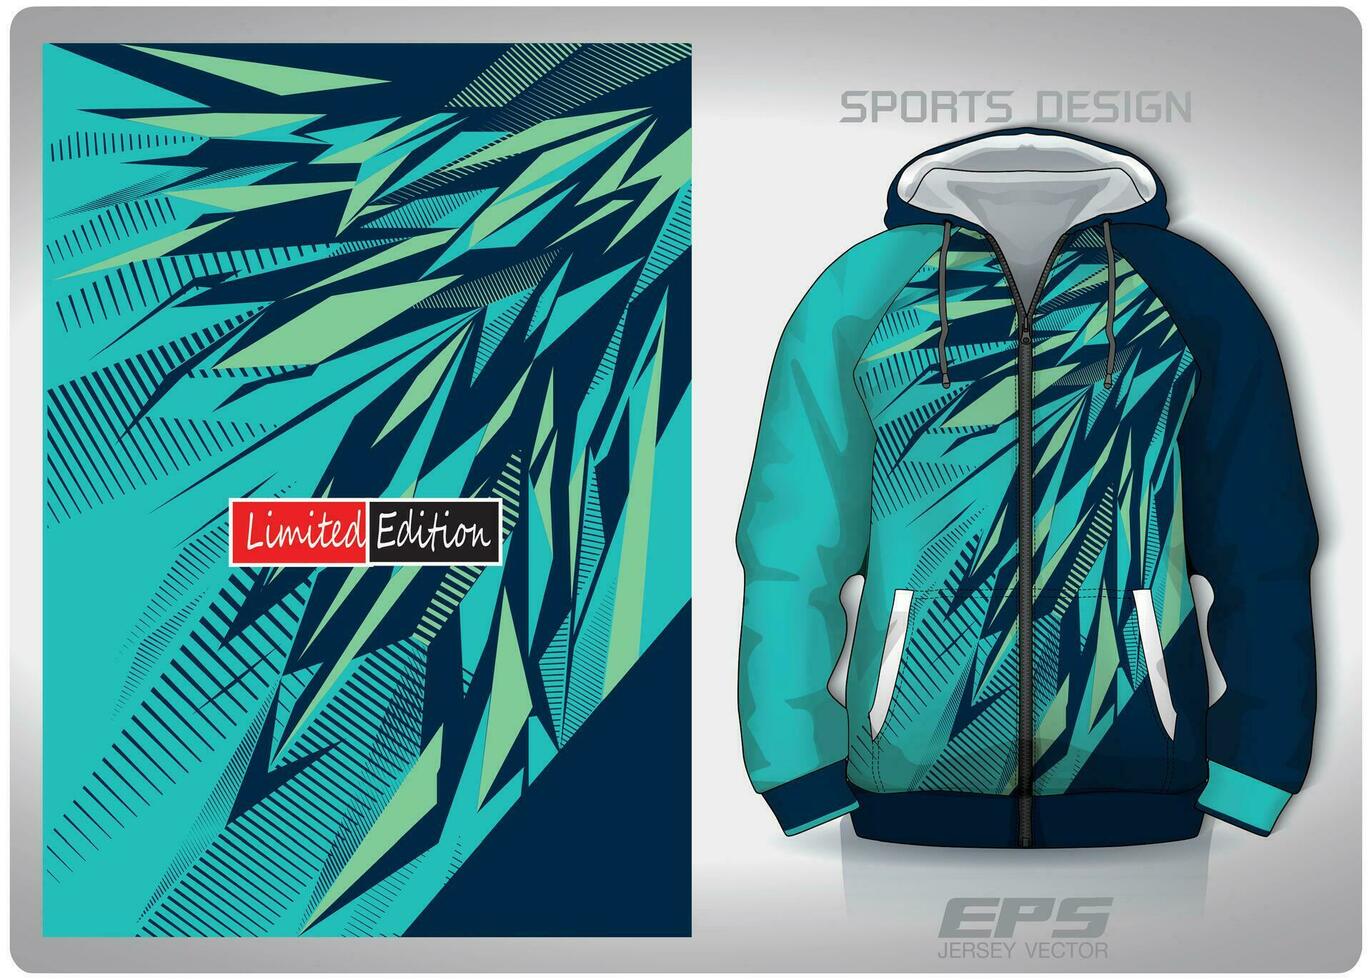 Vector sports shirt background image.mint green broken glass pattern design, illustration, textile background for sports long sleeve hoodie, jersey hoodie